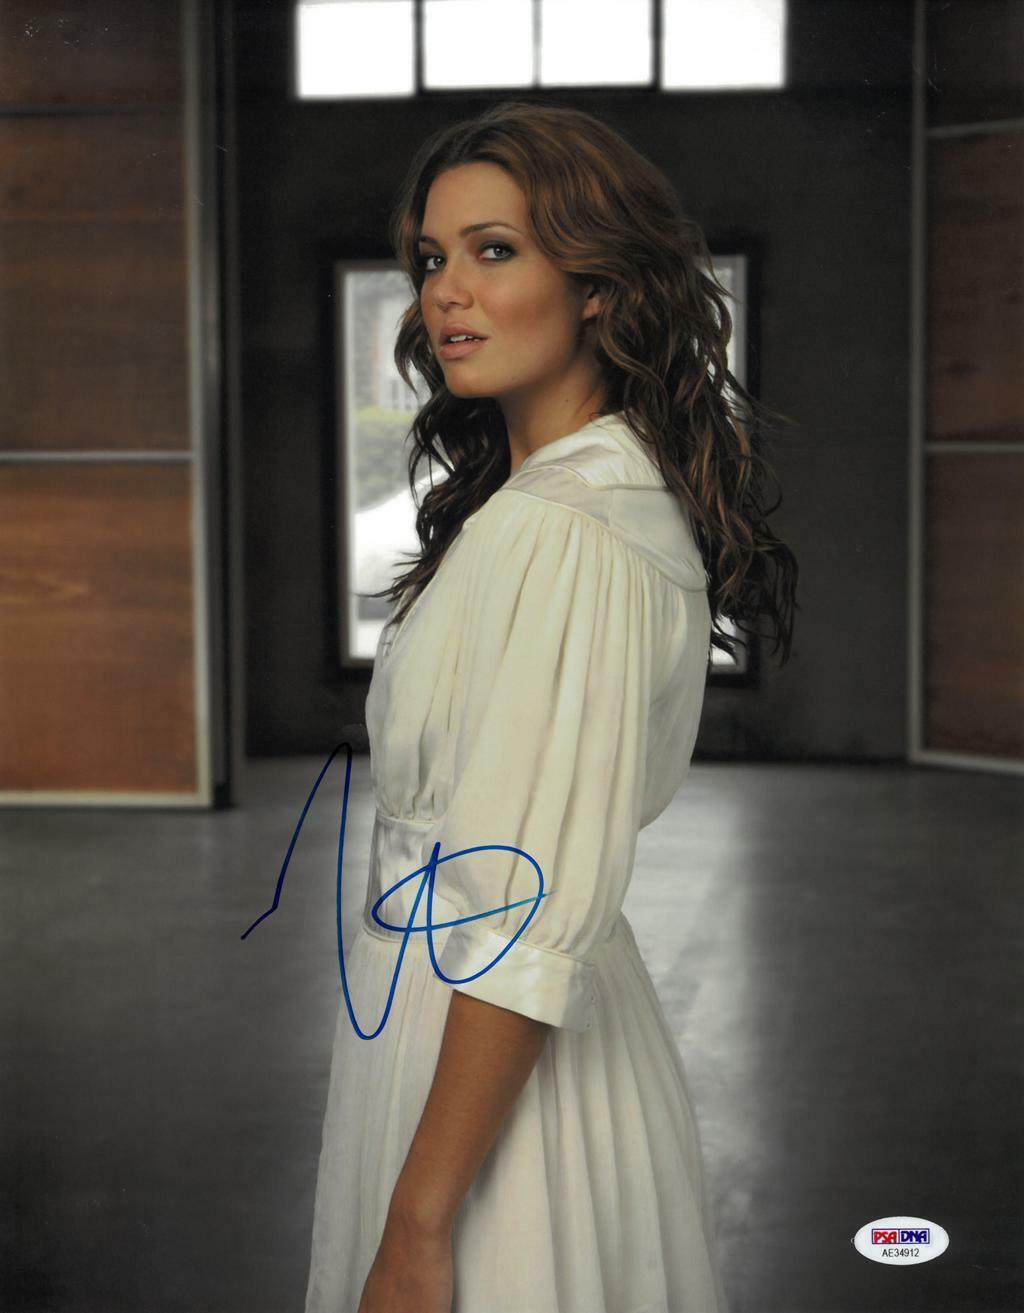 Mandy Moore Signed Authentic Autographed 11x14 Photo Poster painting PSA/DNA #AE34912